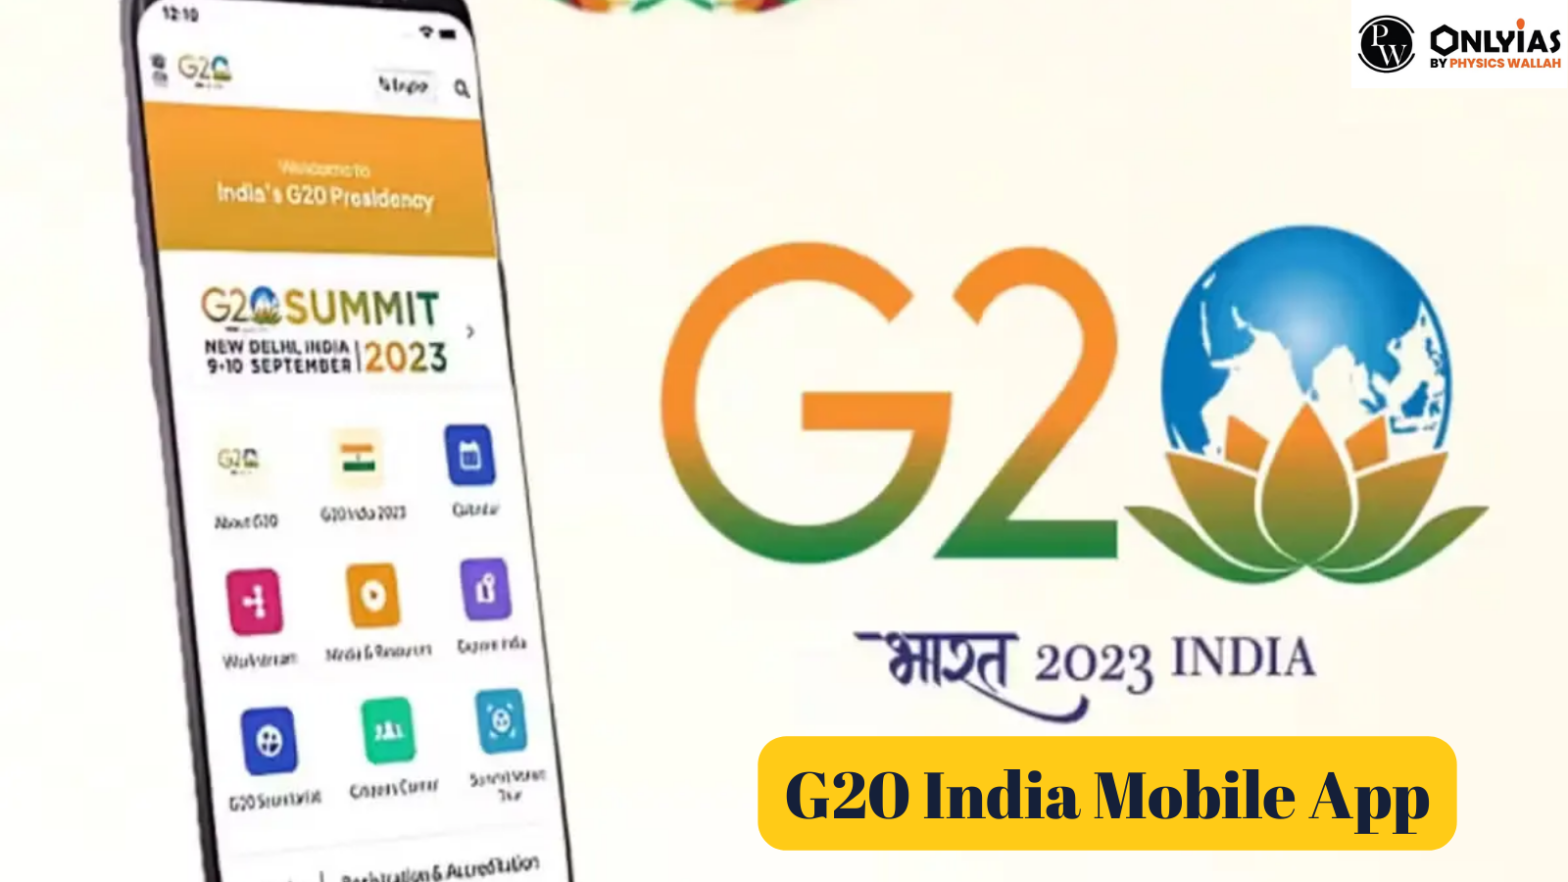 G20 India Mobile App, Indian Government Launches G20 India Mobile App for Visitors